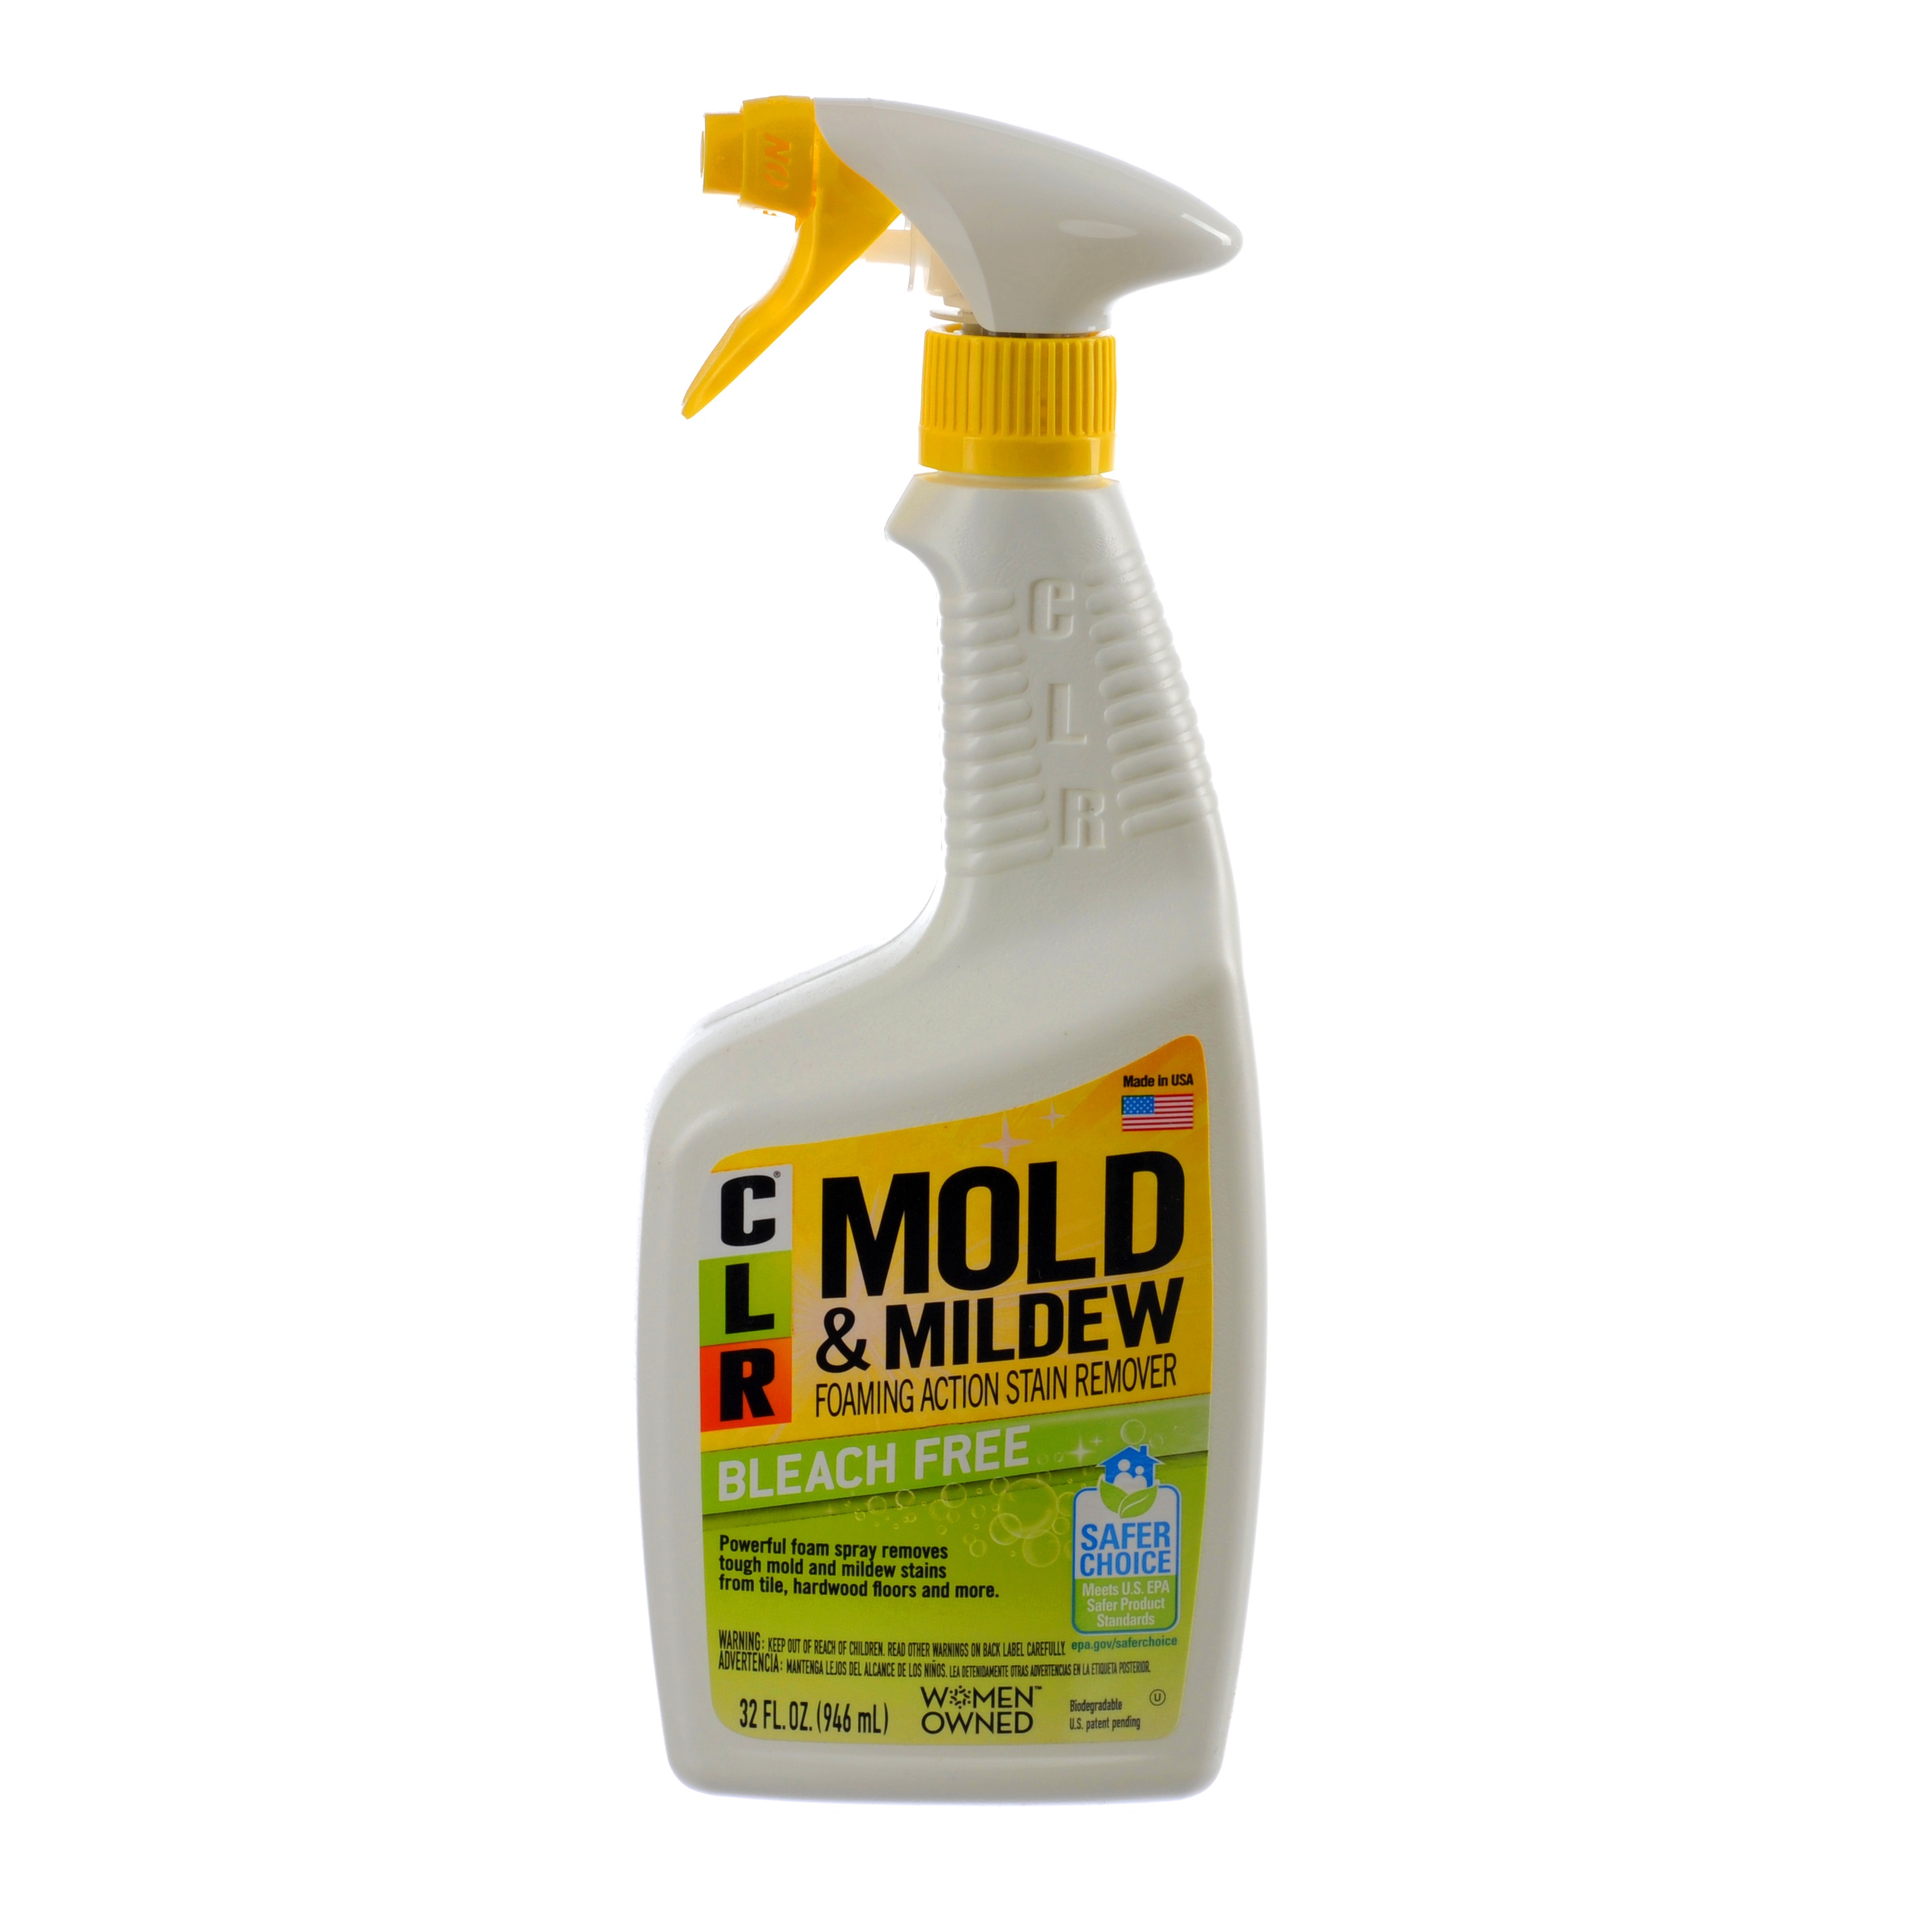 CLR Mold and Mildew Foaming Action Stain Remover 32 oz